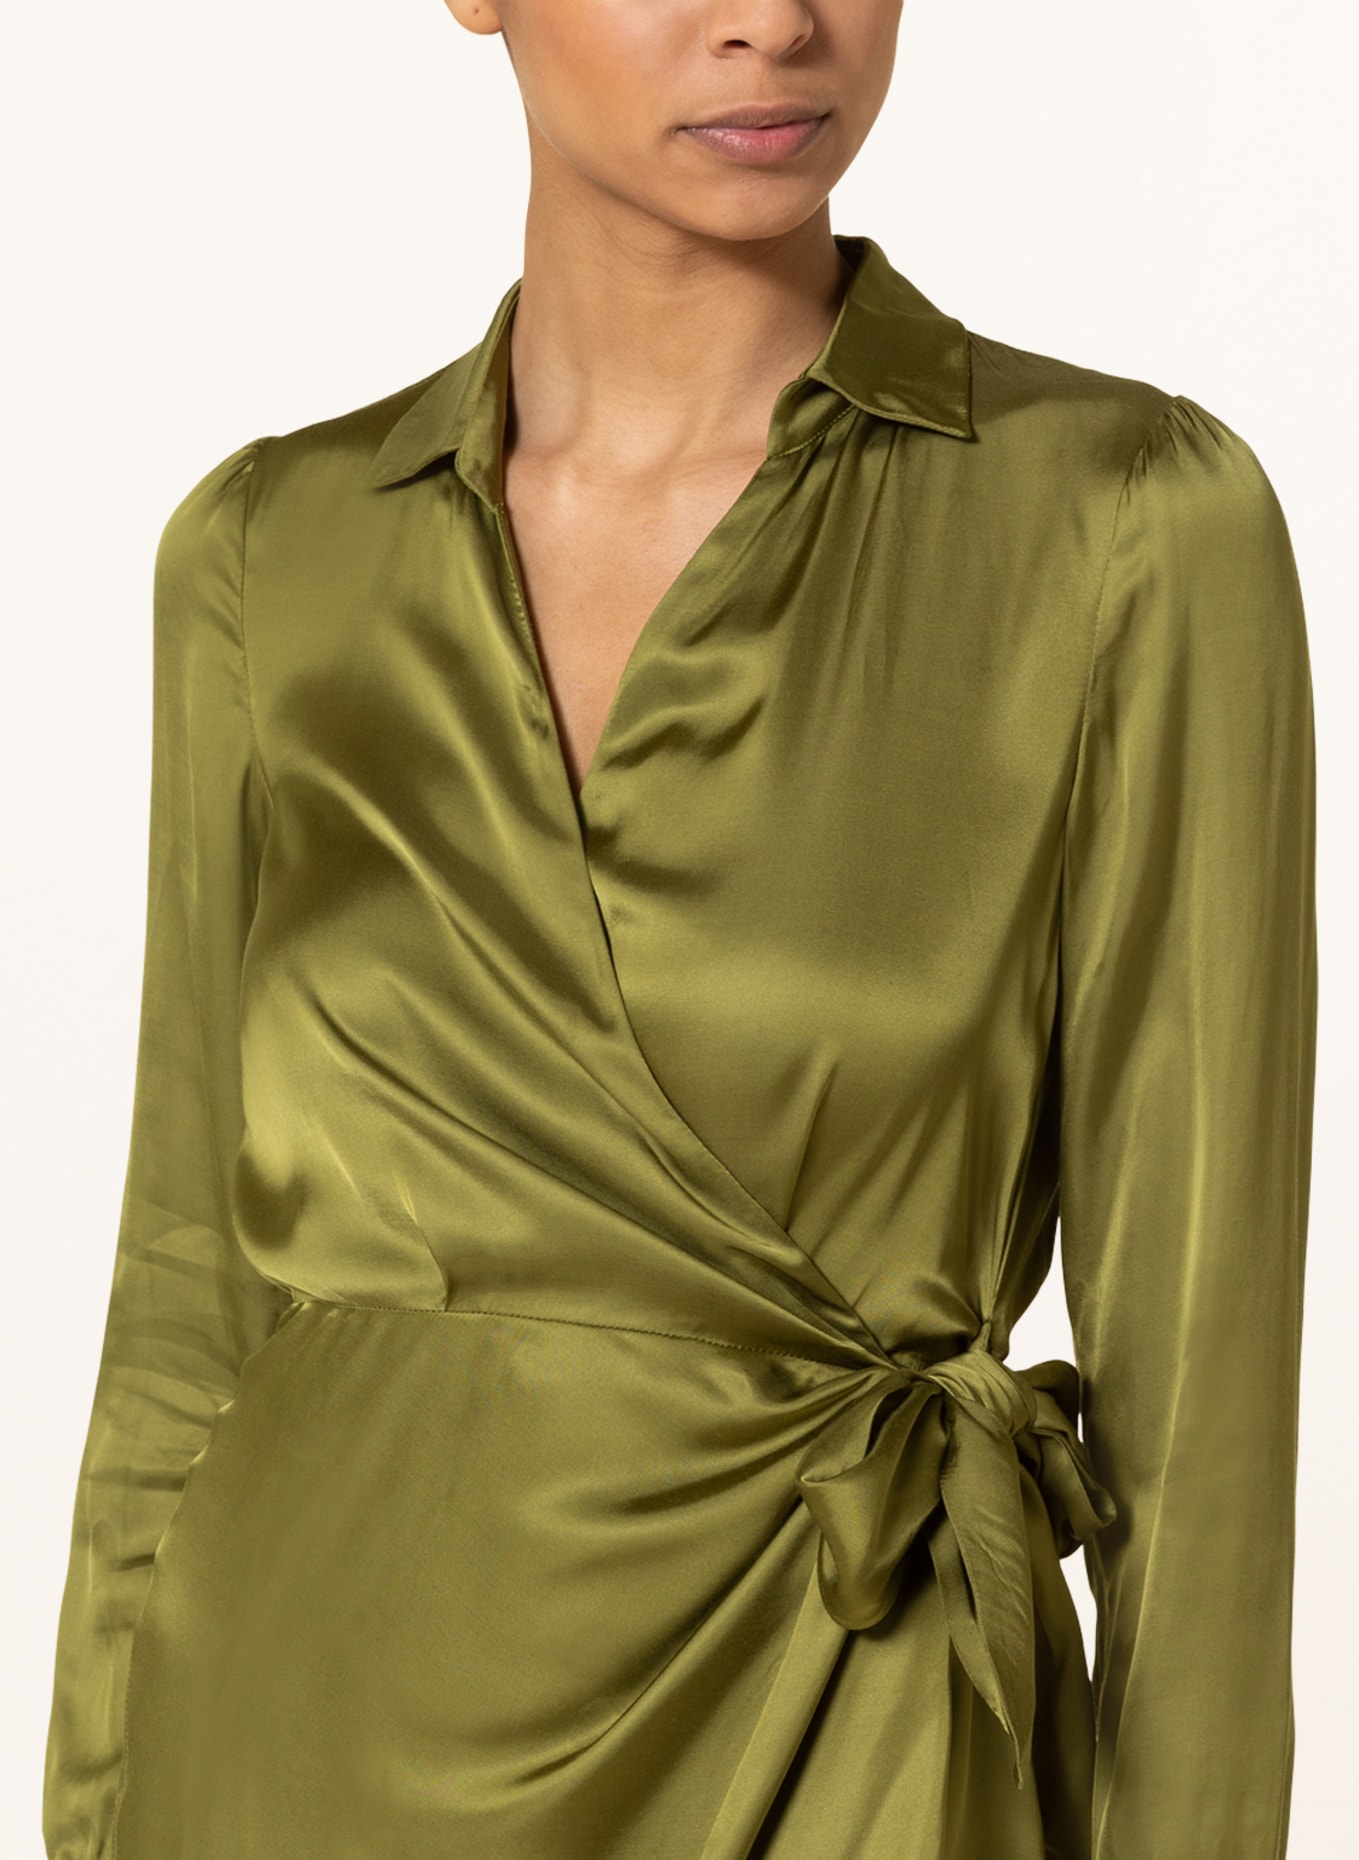 MAX & Co. Wrap dress DITTA made of satin, Color: OLIVE (Image 4)